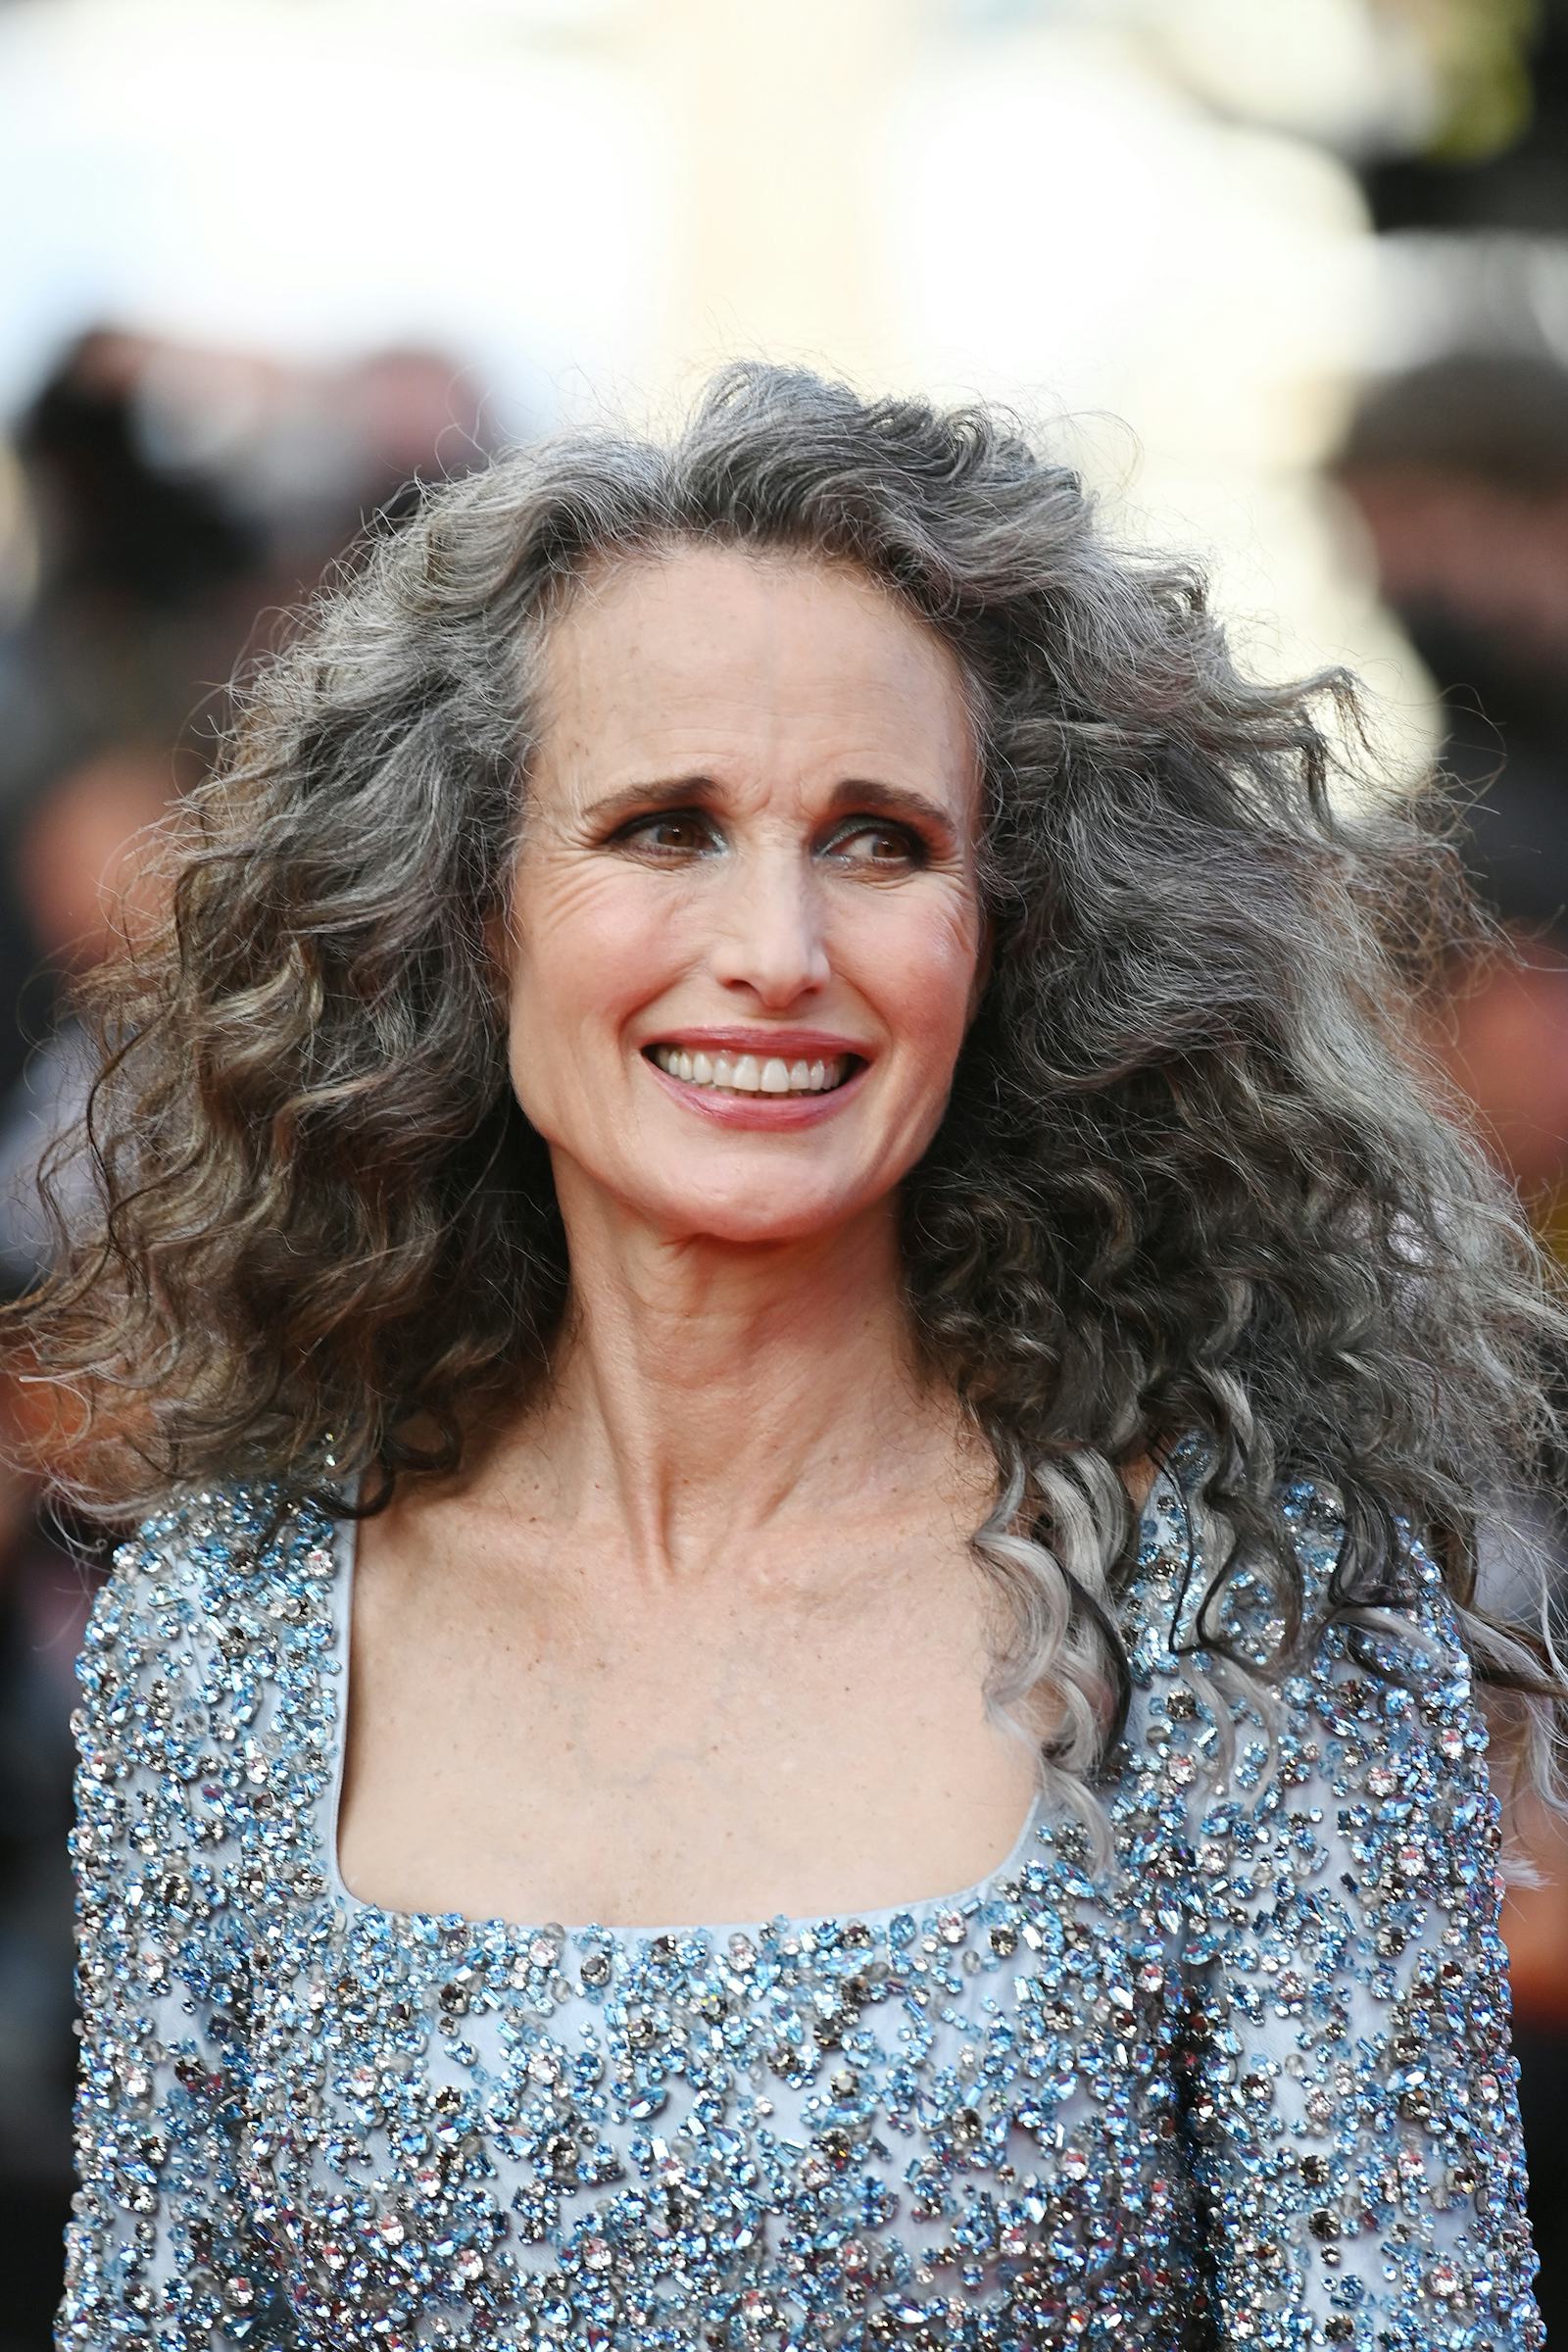 Andie Macdowell S 2021 Cannes Film Festival Beauty Look Spotlighted Her Stunning Gray Hair